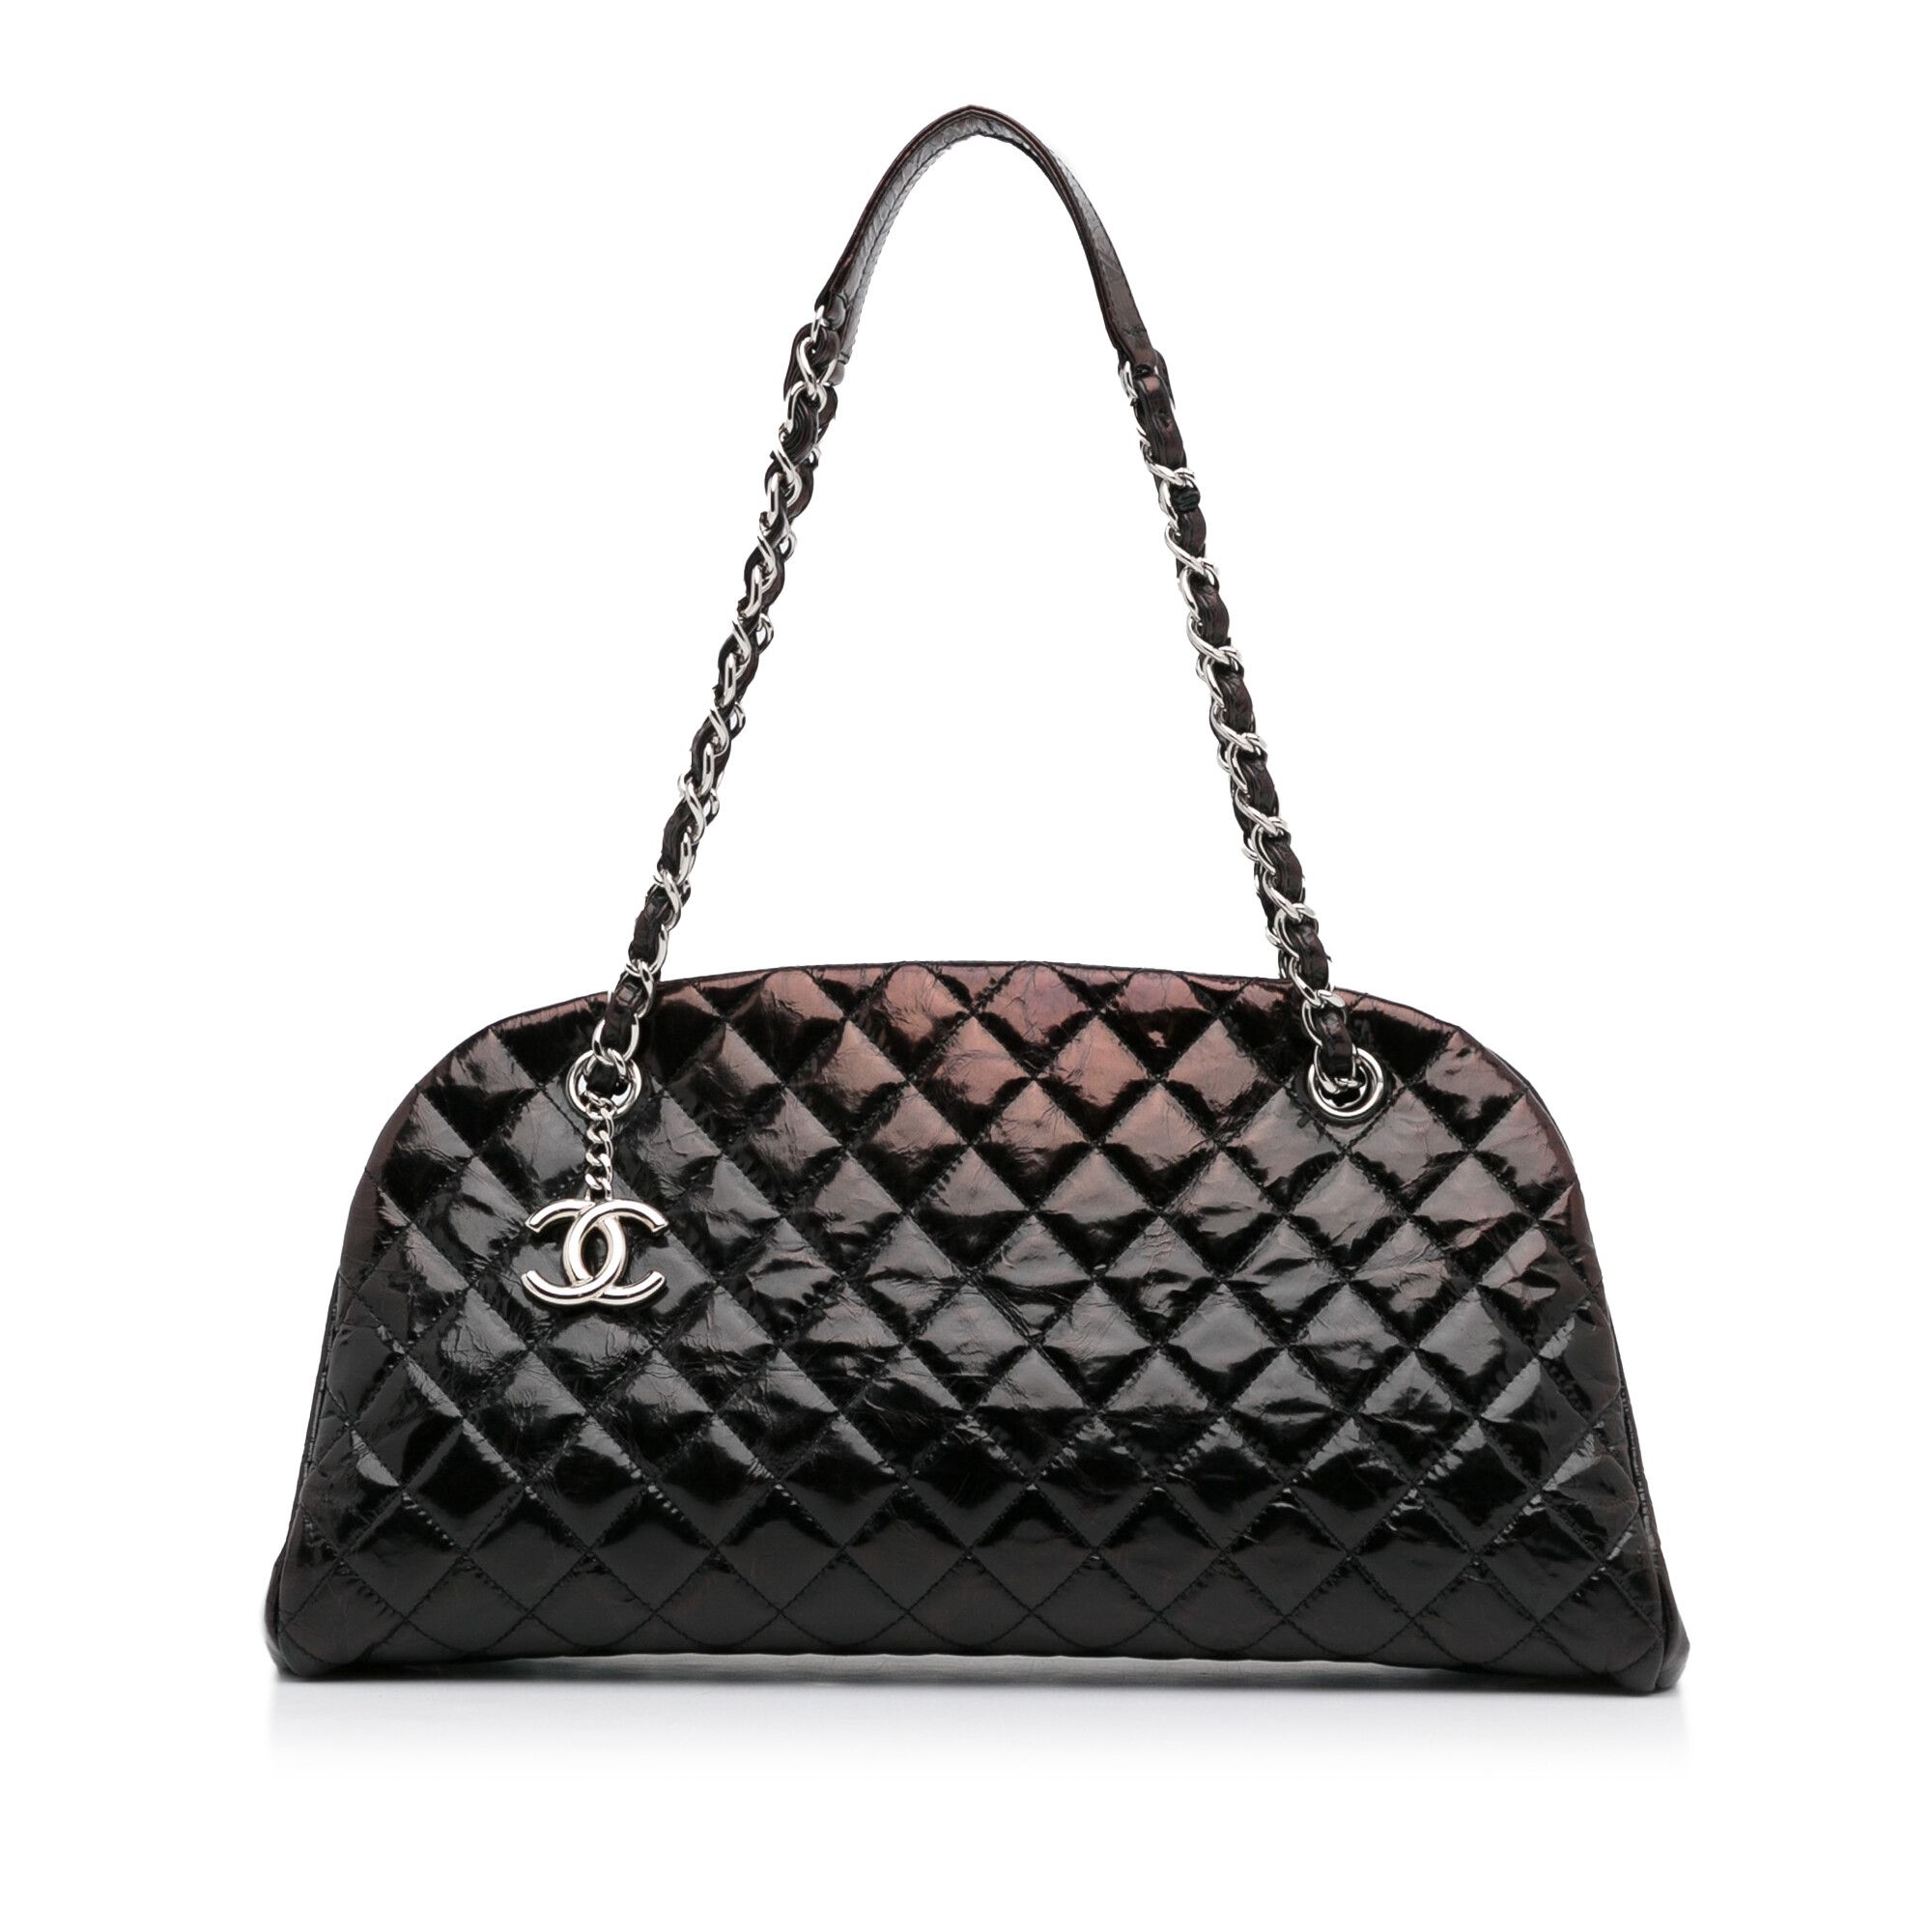 Chanel Chanel Just Mademoiselle